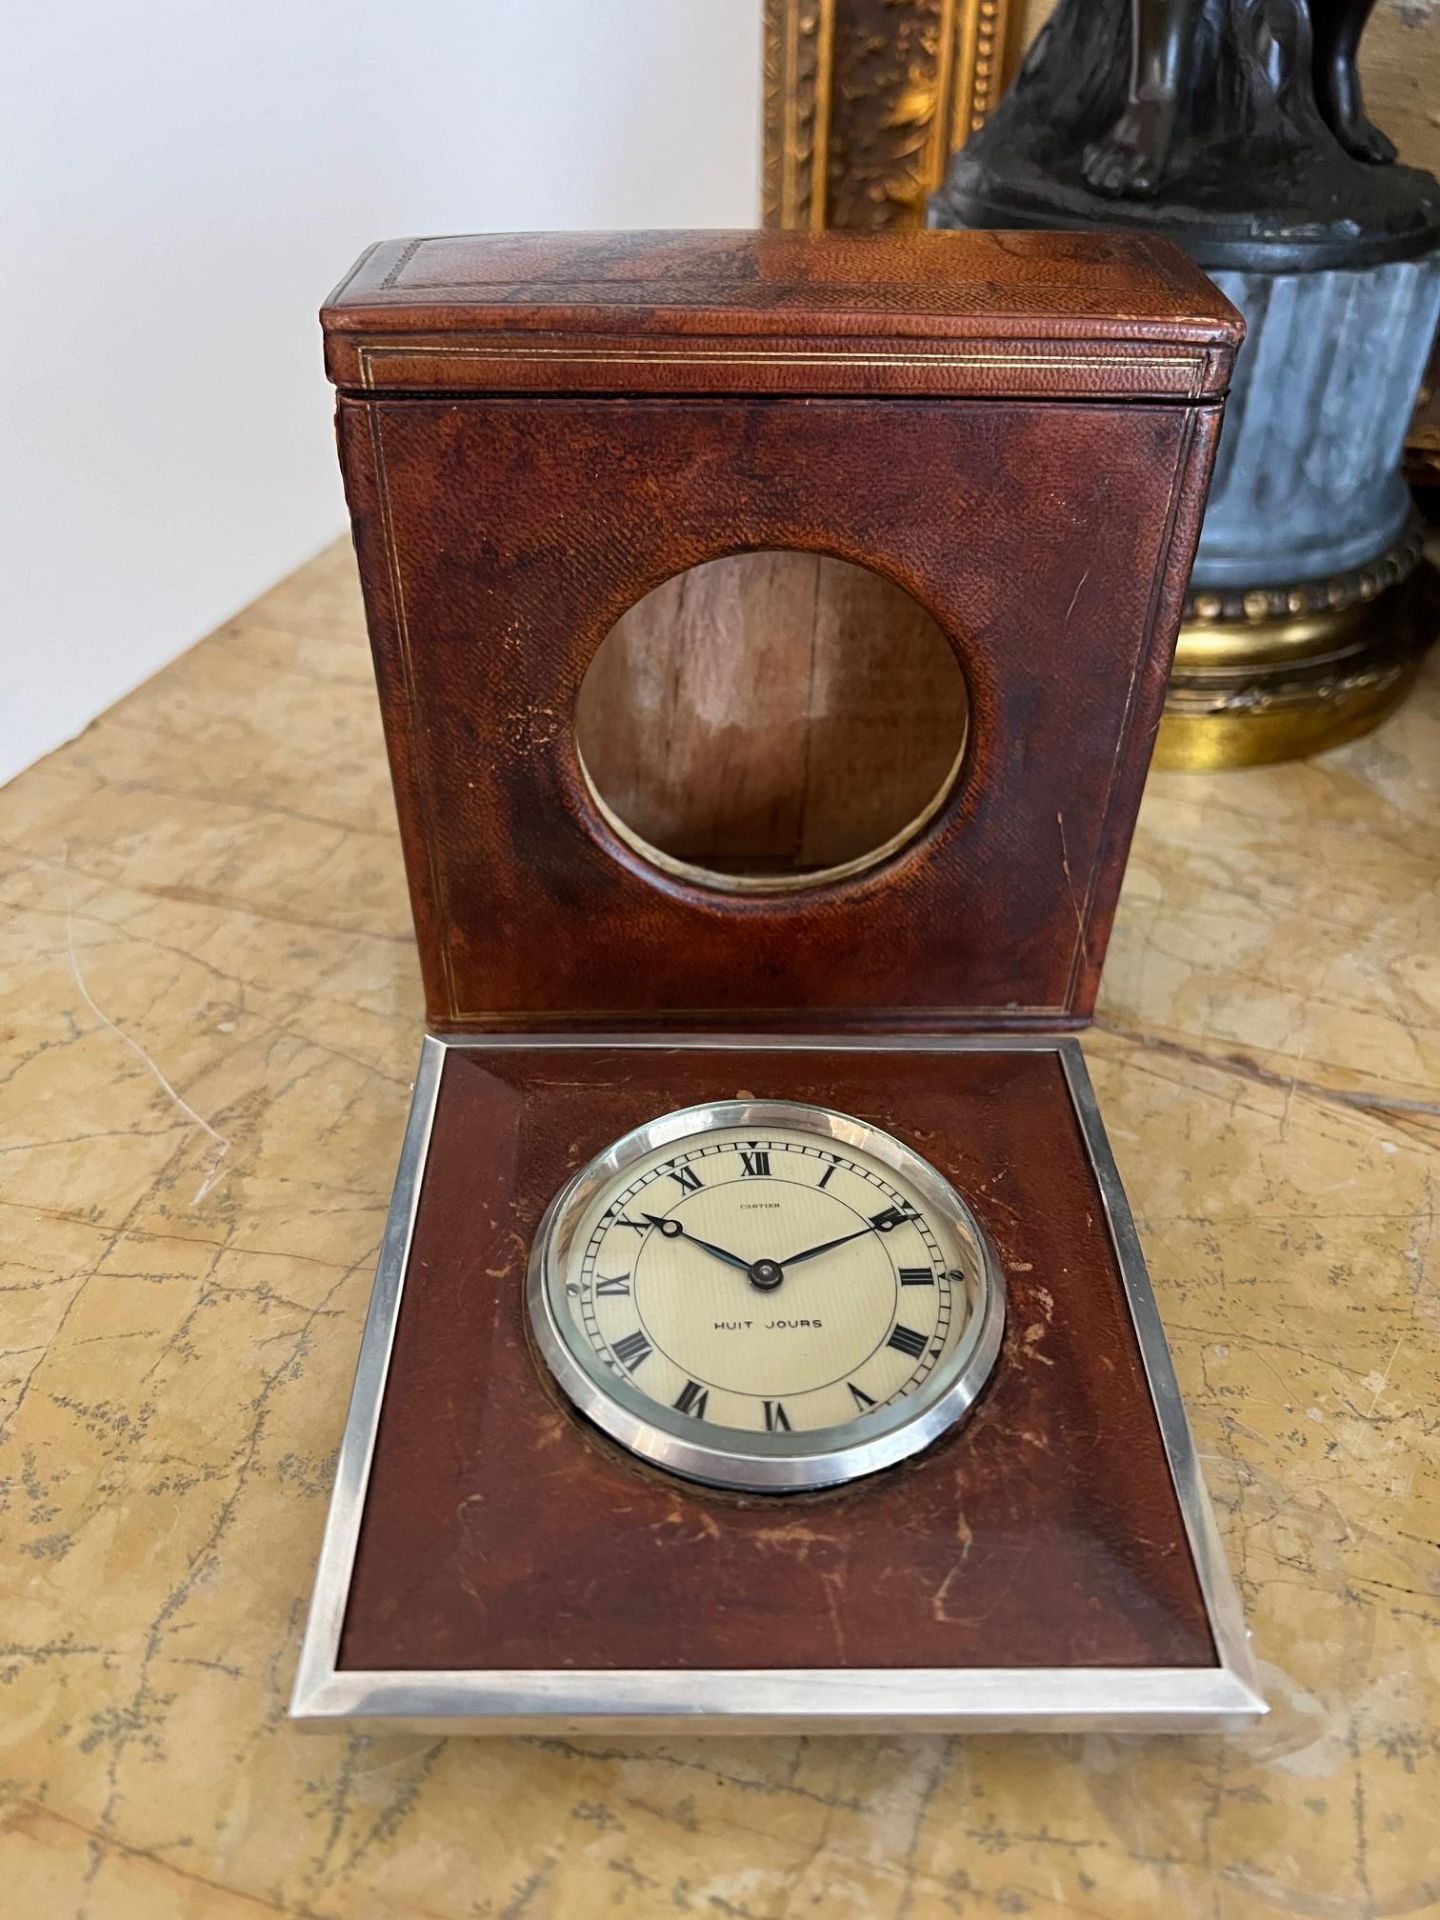 CARTIER: A 1930'S SILVER AND LEATHER TRAVELLING CLOCK IN ORIGINAL CASE - Image 6 of 6